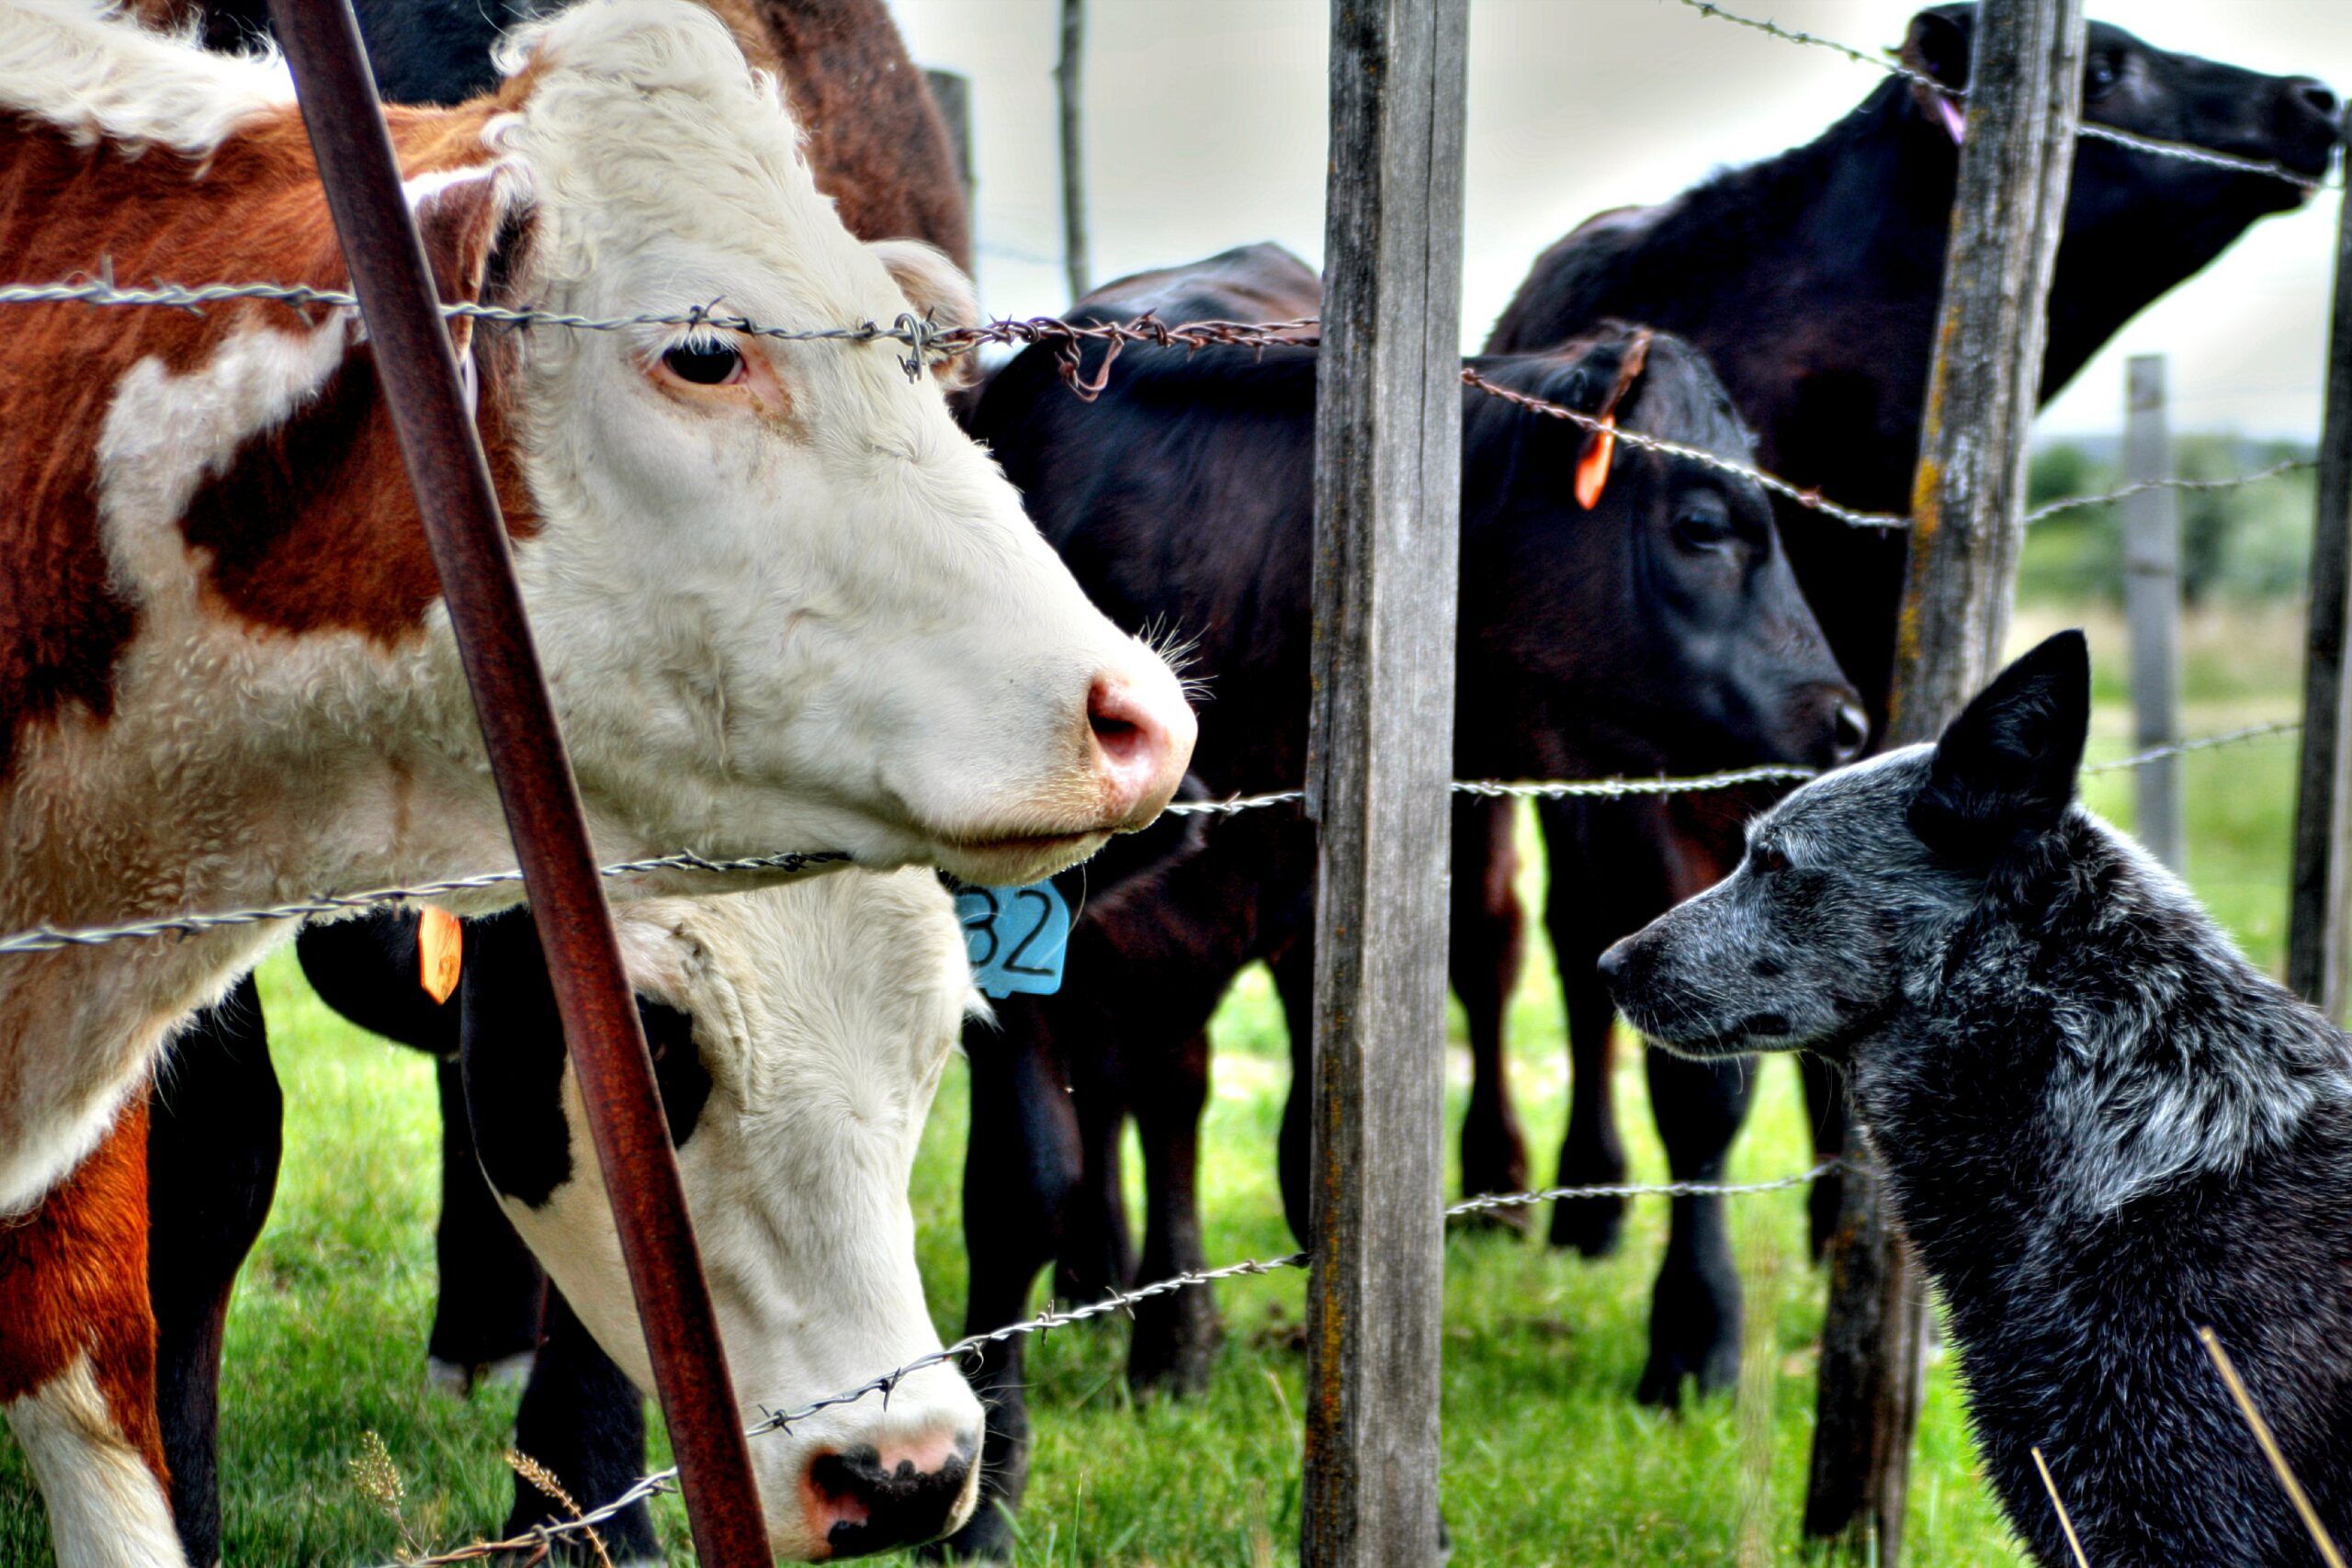 Cows and Dog - Owners have responsibility